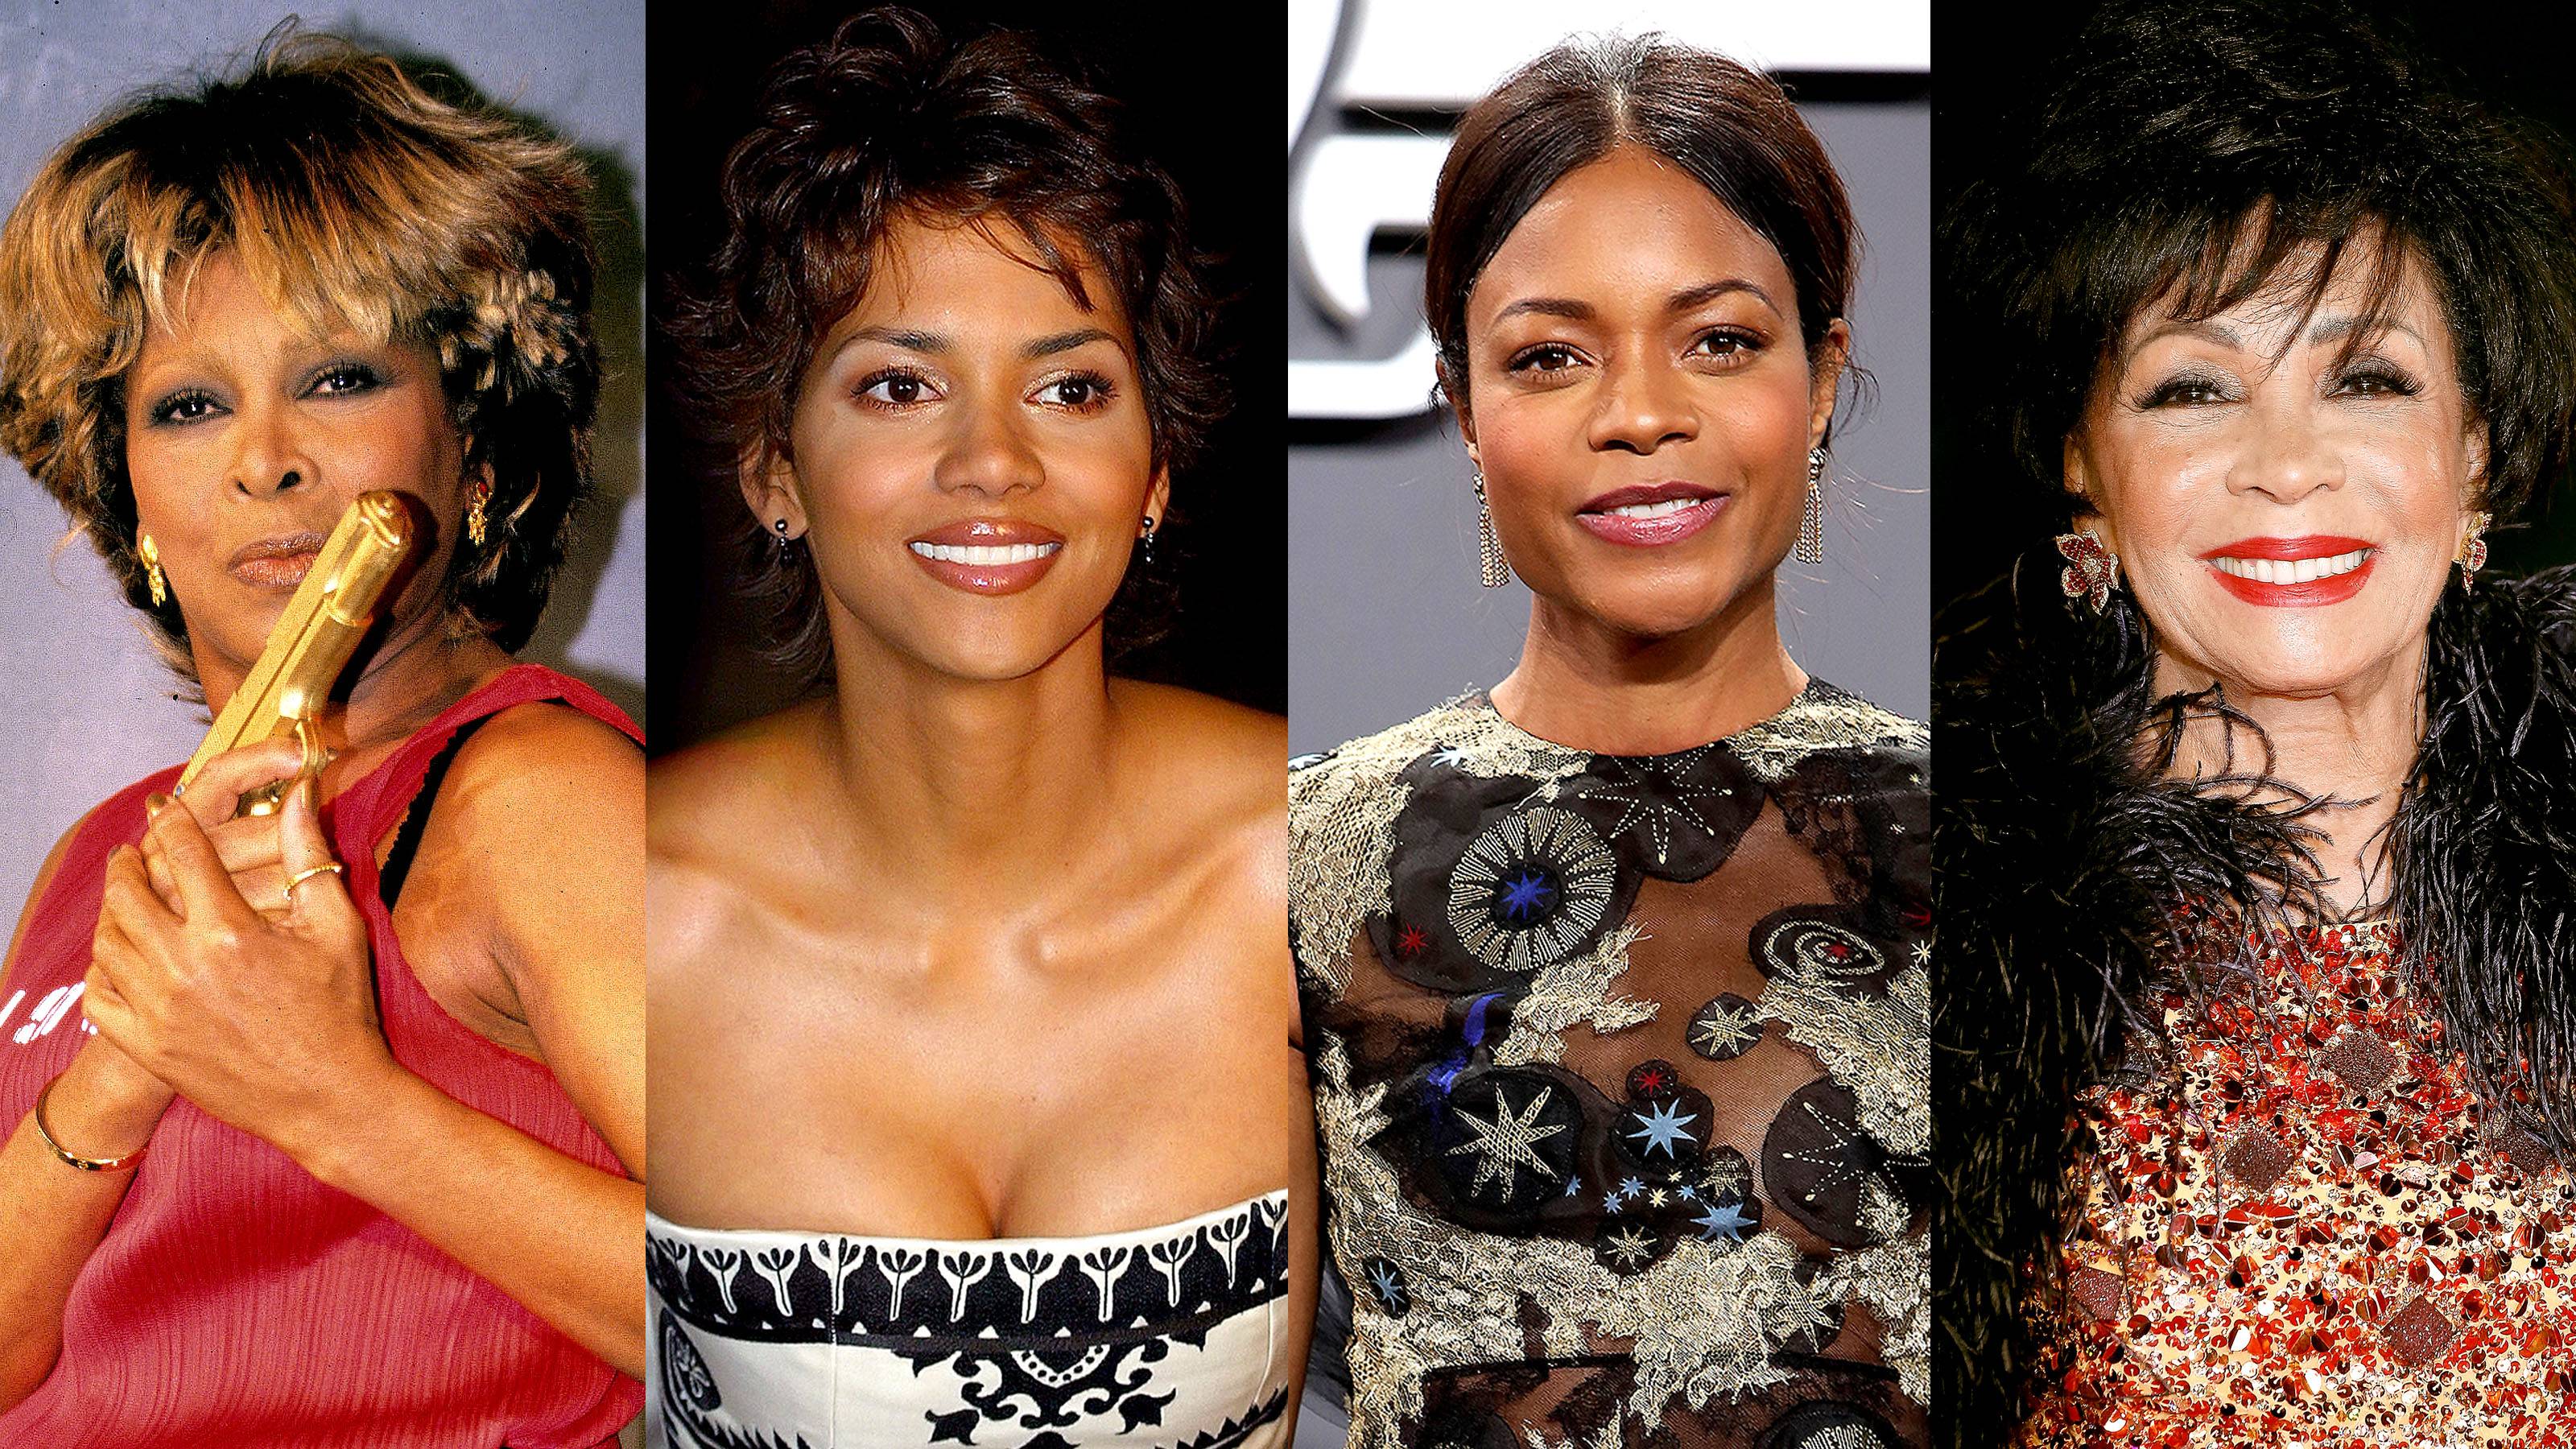 Our Bond Legacy - From Bond girls to Bond soundtracks, Tina Turner, Halle Berry, Naomi Harris and Dame Shirley Bassey show that Black women have been an important part of the James Bond legacy. Here’s our wish list of future Black girl power for the film franchise. By Kellee Terrell(Photos from Left: Fred Duval/FilmMagic, Scott Barbour/Getty Images, Adam Berry/Getty Images for Sony Pictures, John Phillips/Getty Images)